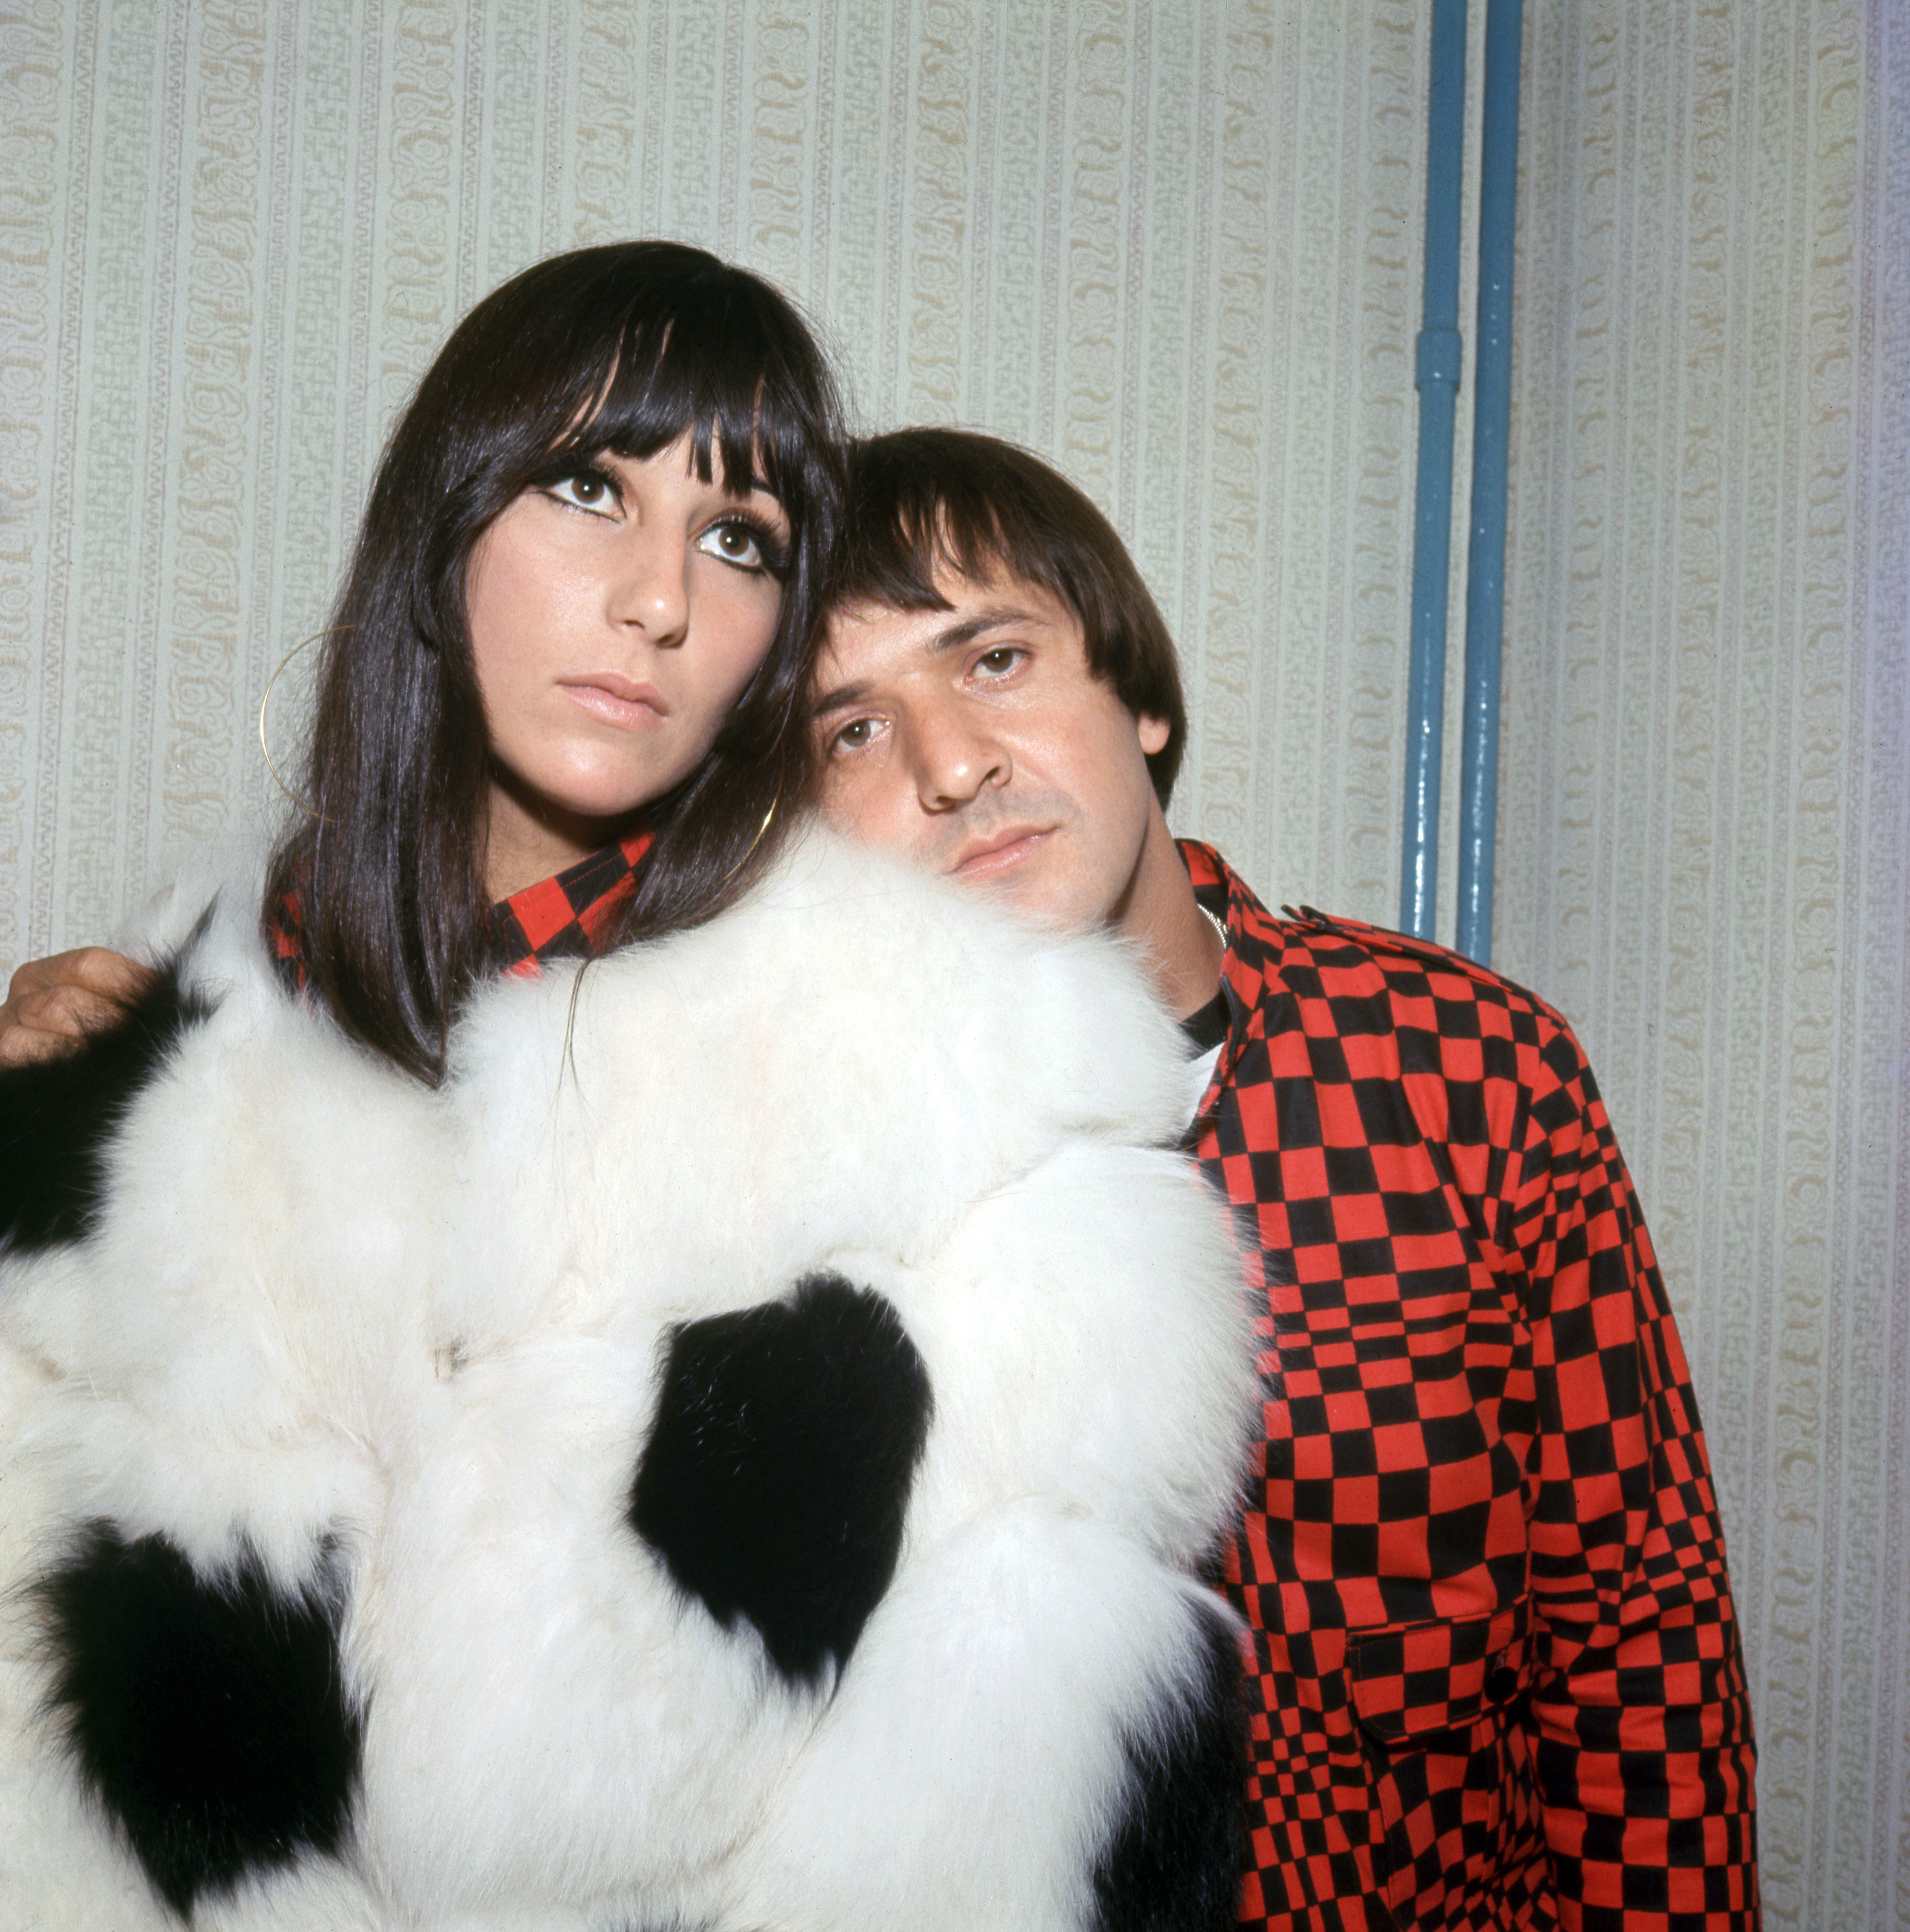 Cher and Sonny Bono in London, England in 1966 | Source: Getty Images